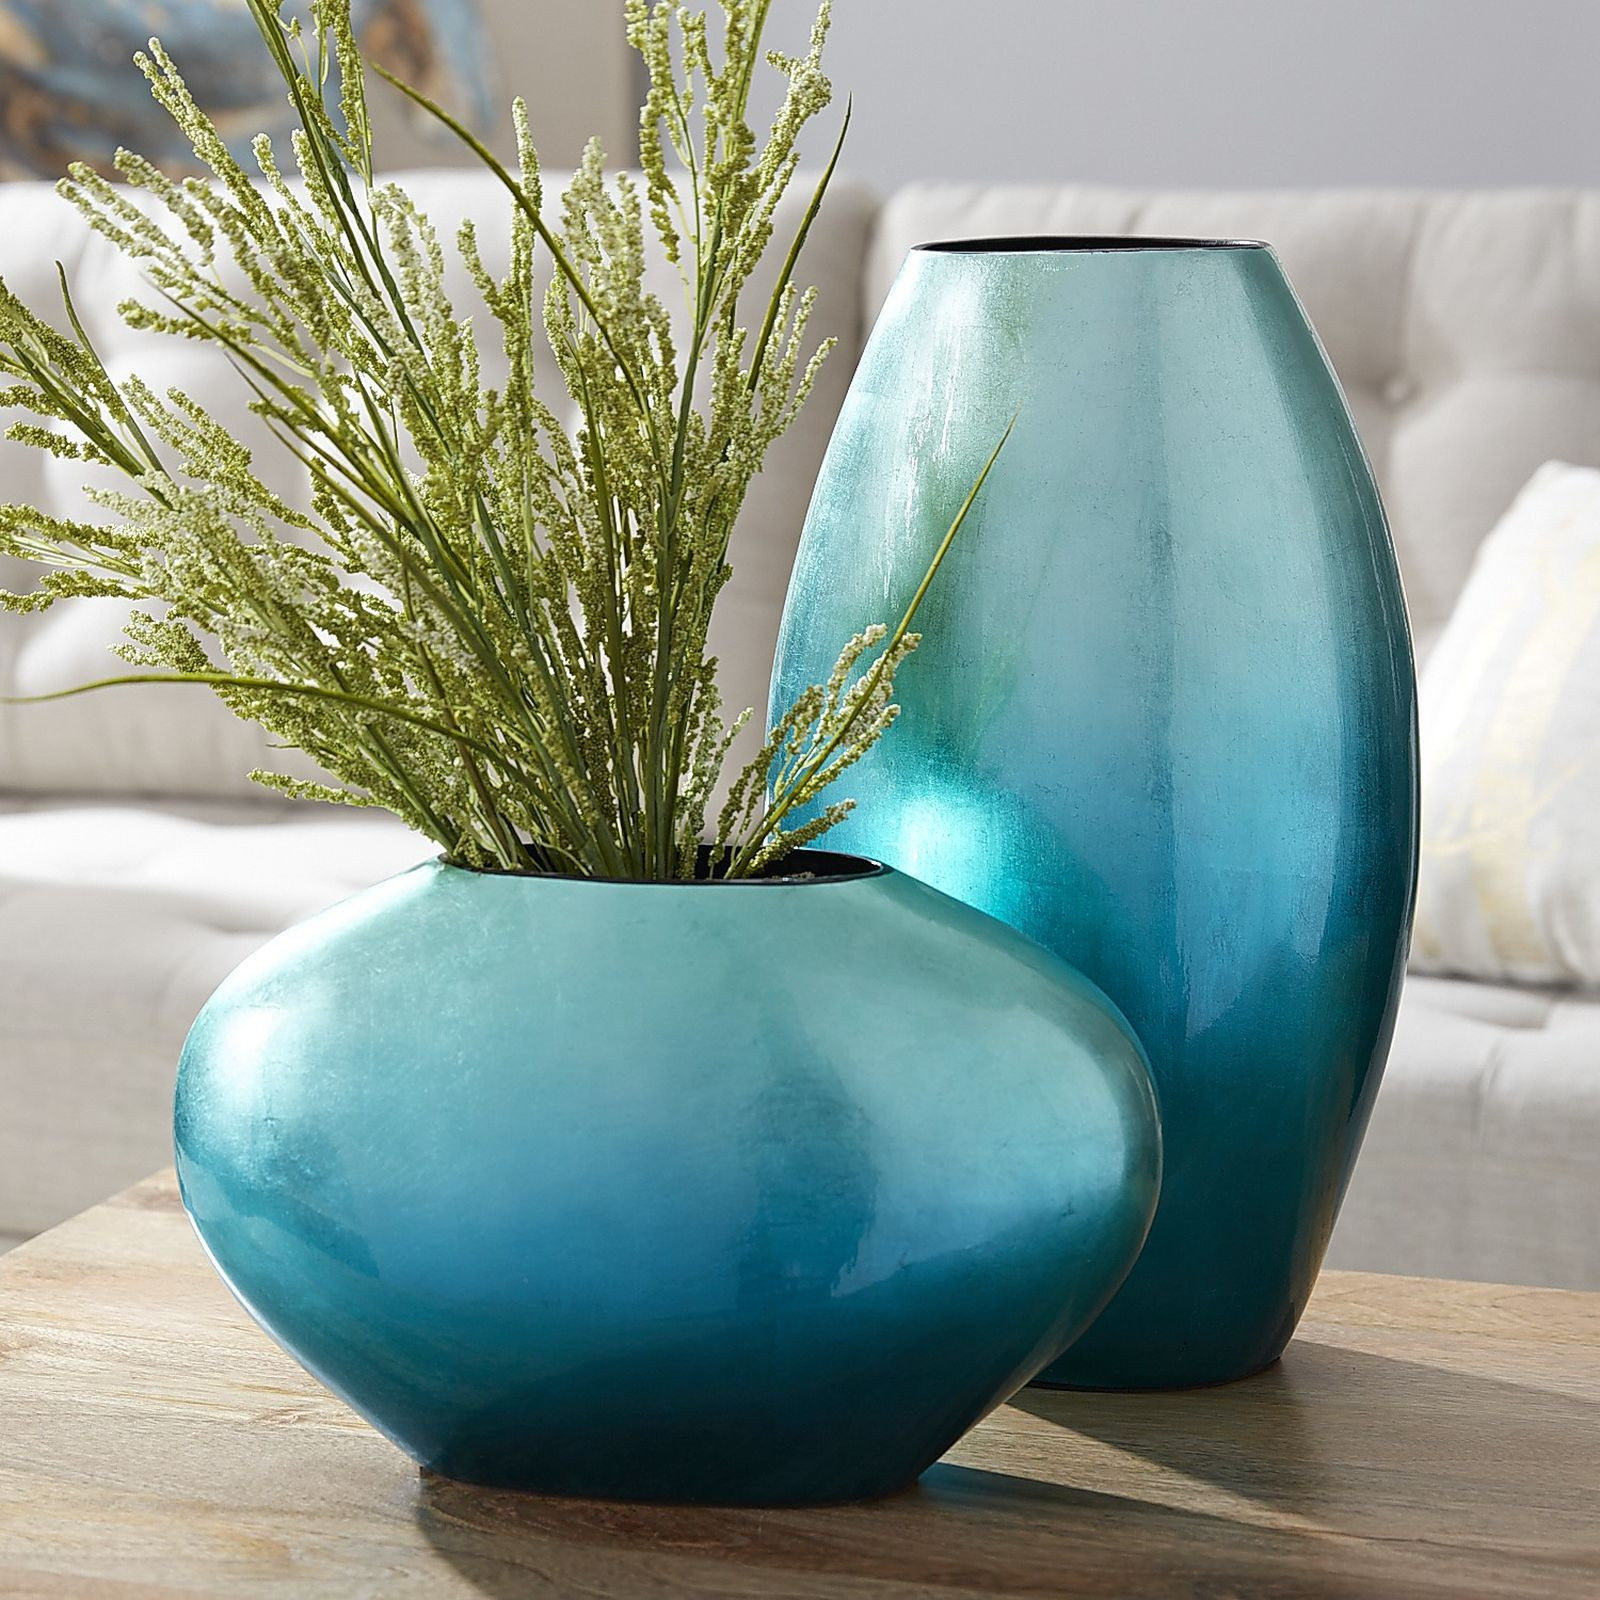 24 Amazing Nachtmann Crystal Vase 2024 free download nachtmann crystal vase of oval glass vase stock sinuous lines and iridescent color make these with regard to oval glass vase stock sinuous lines and iridescent color make these ceramic vases